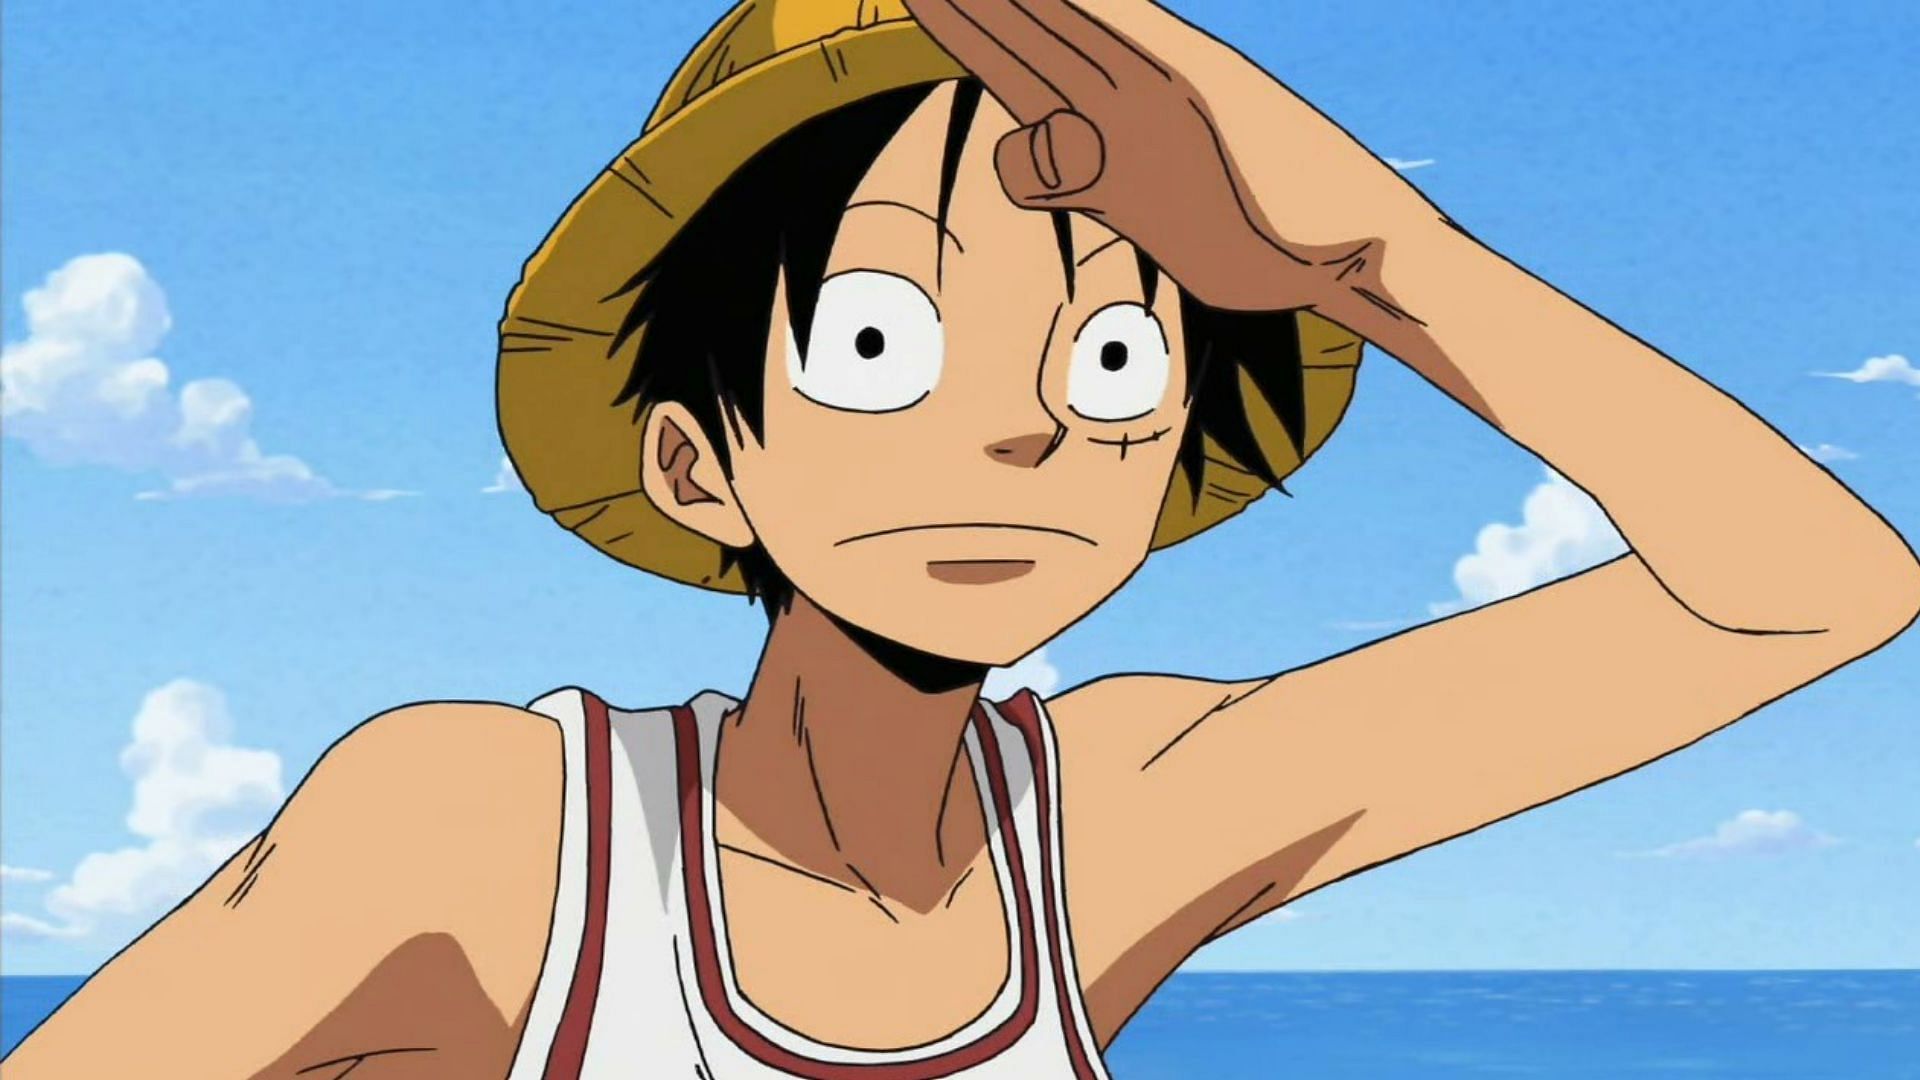 Luffy was skinnier in the pre-time skip (Image via Toei Animation)